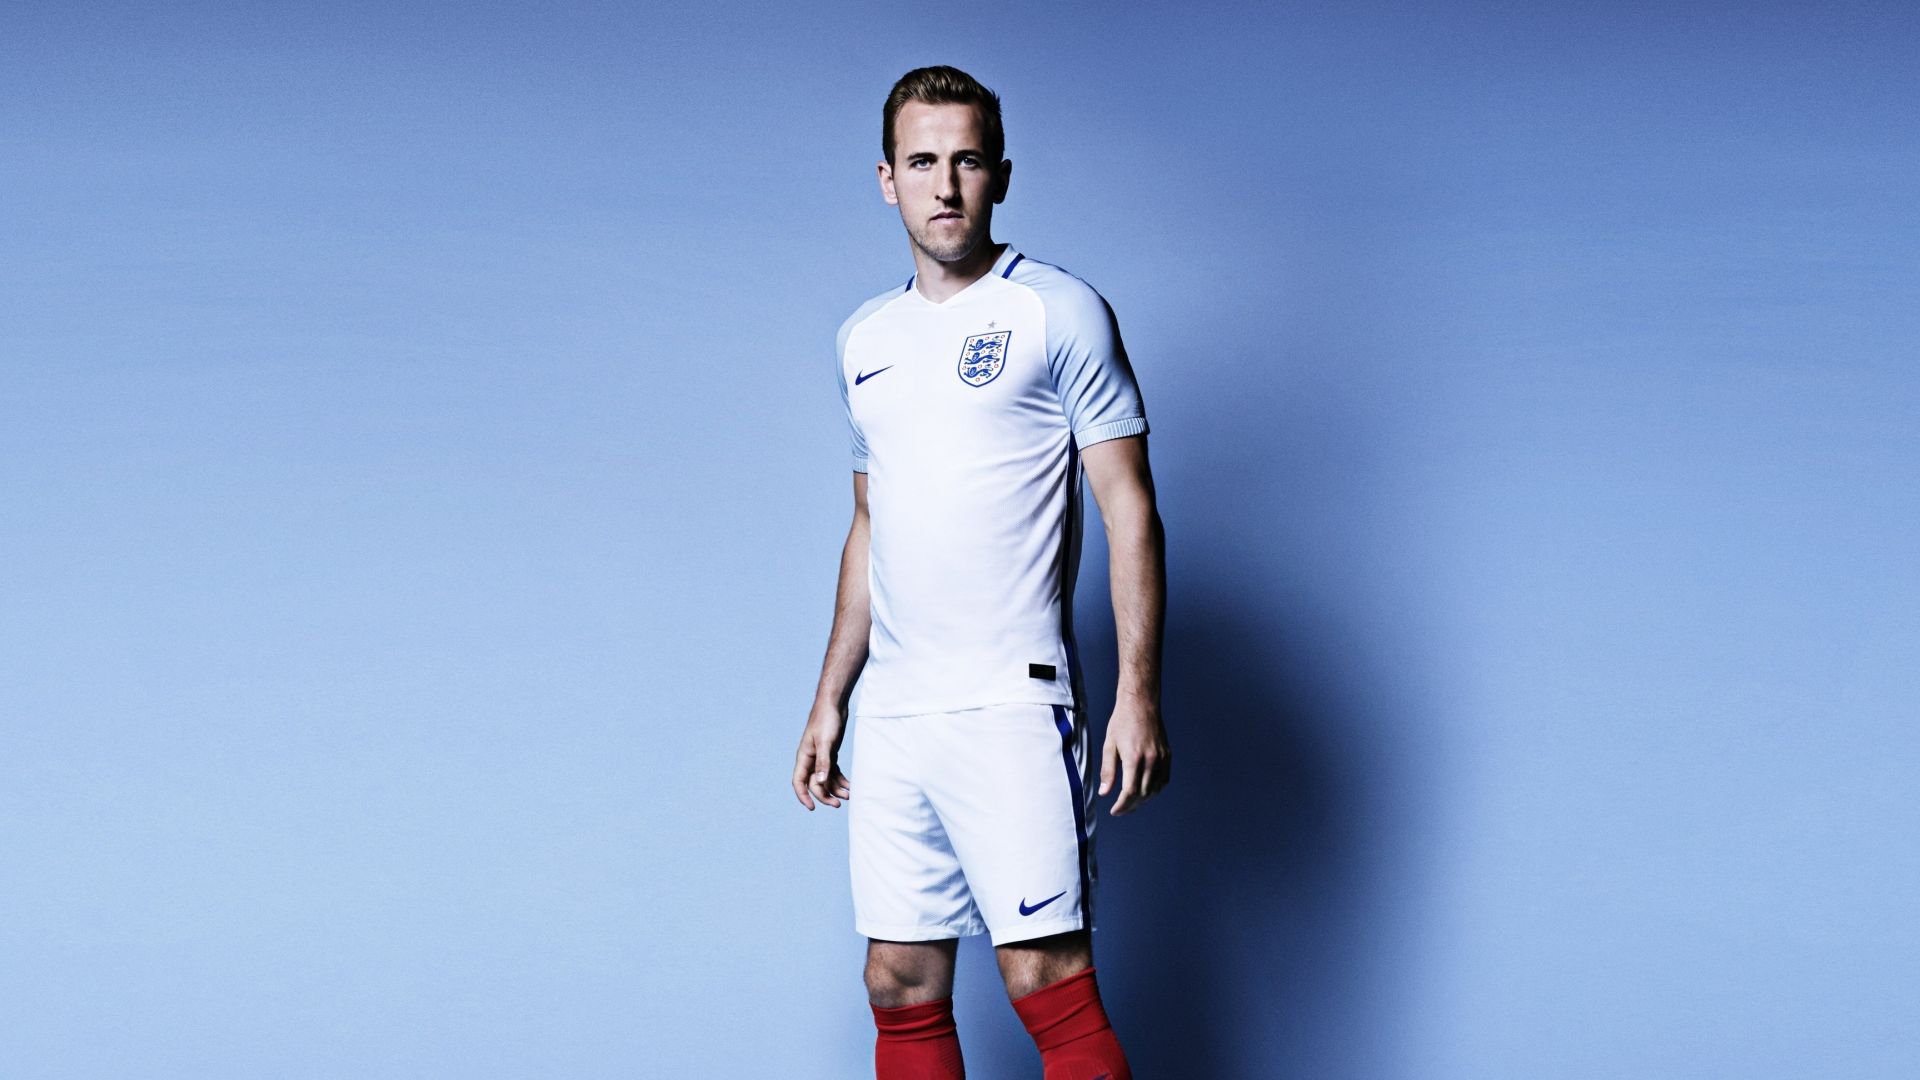 Harry kane, english footballer, photohoot wallpaper, HD image, picture, background, d0a6d6